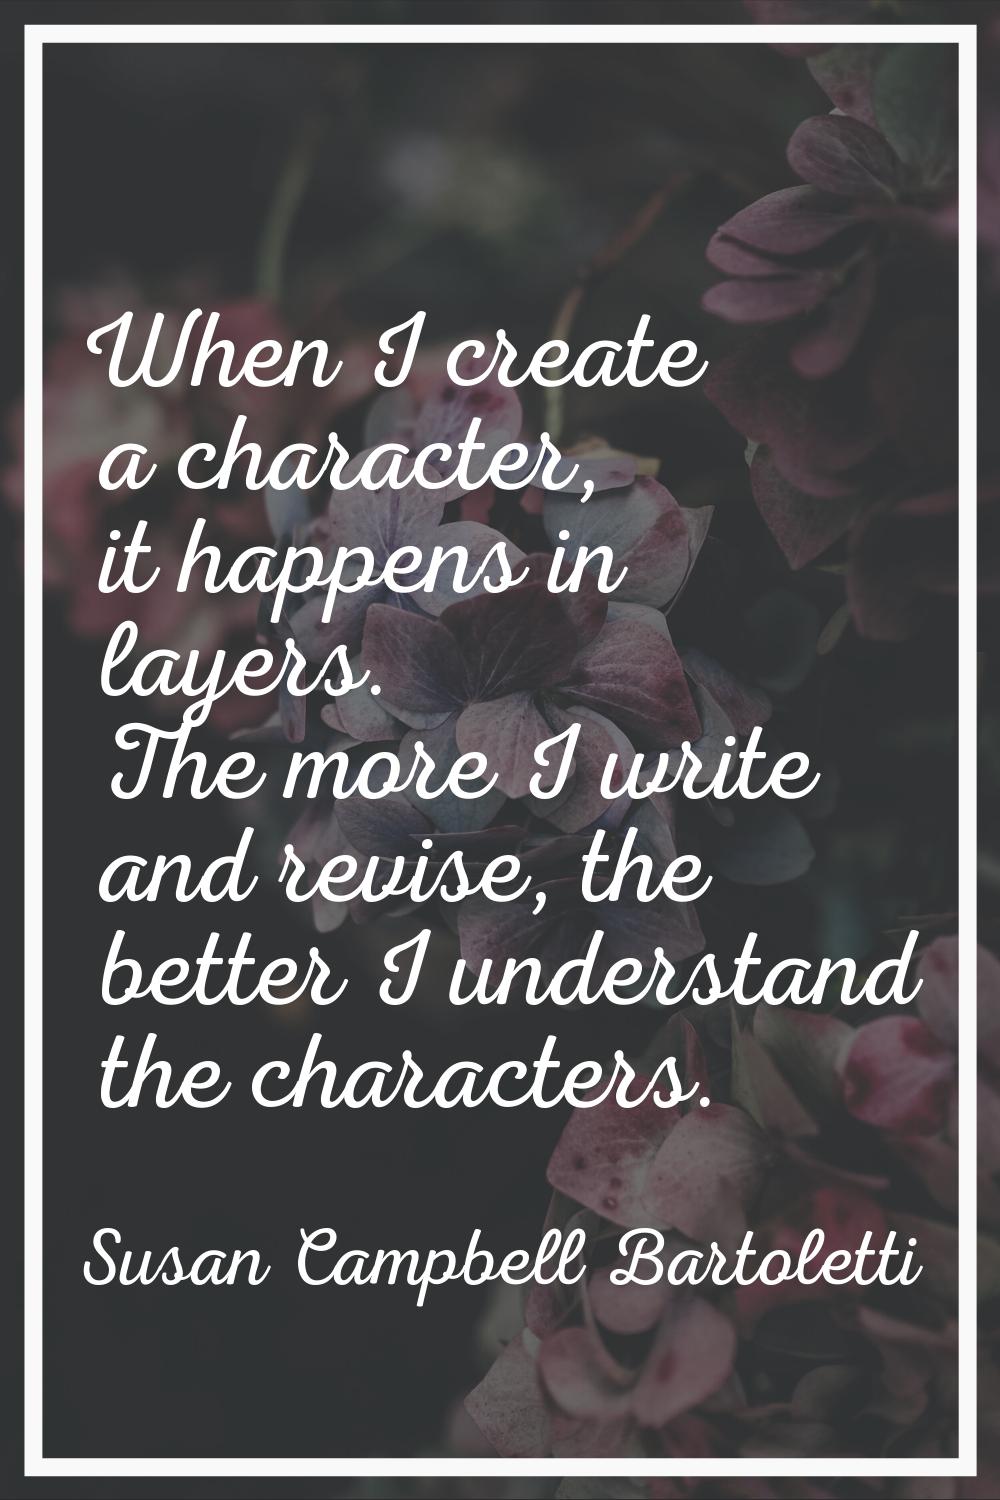 When I create a character, it happens in layers. The more I write and revise, the better I understa